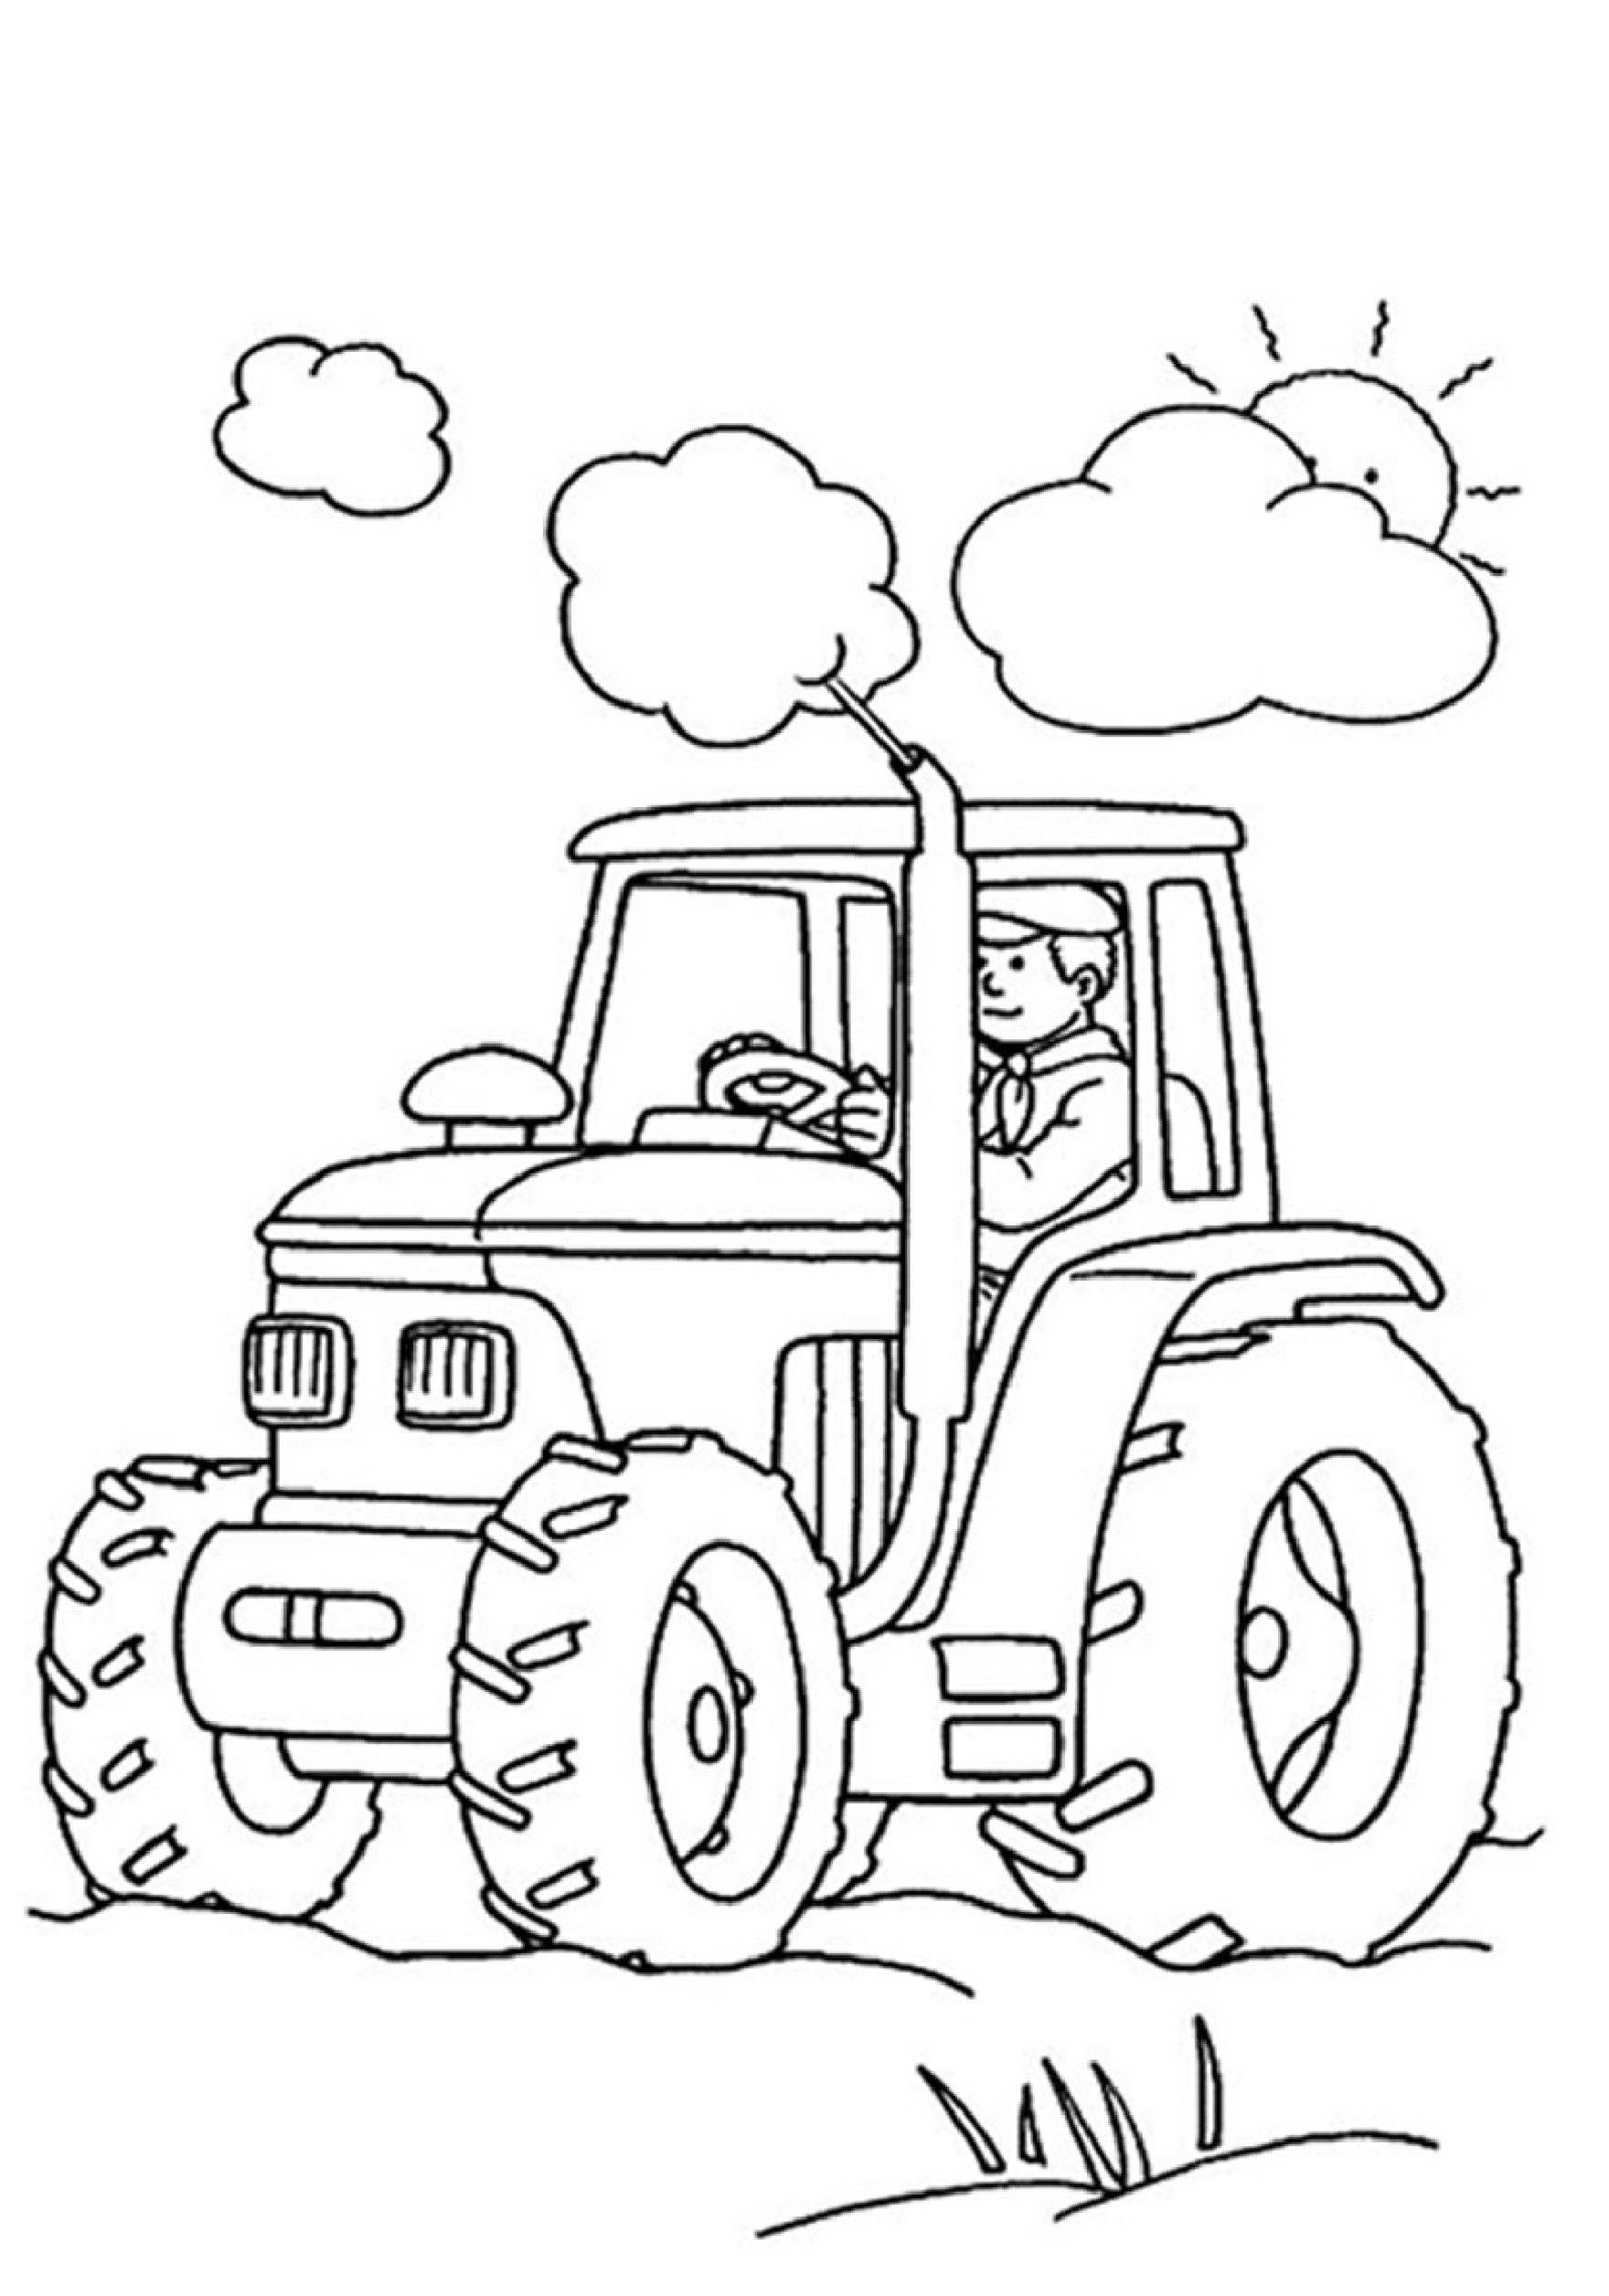 Free Print Coloring Pages For Boys
 Coloring pages for boys